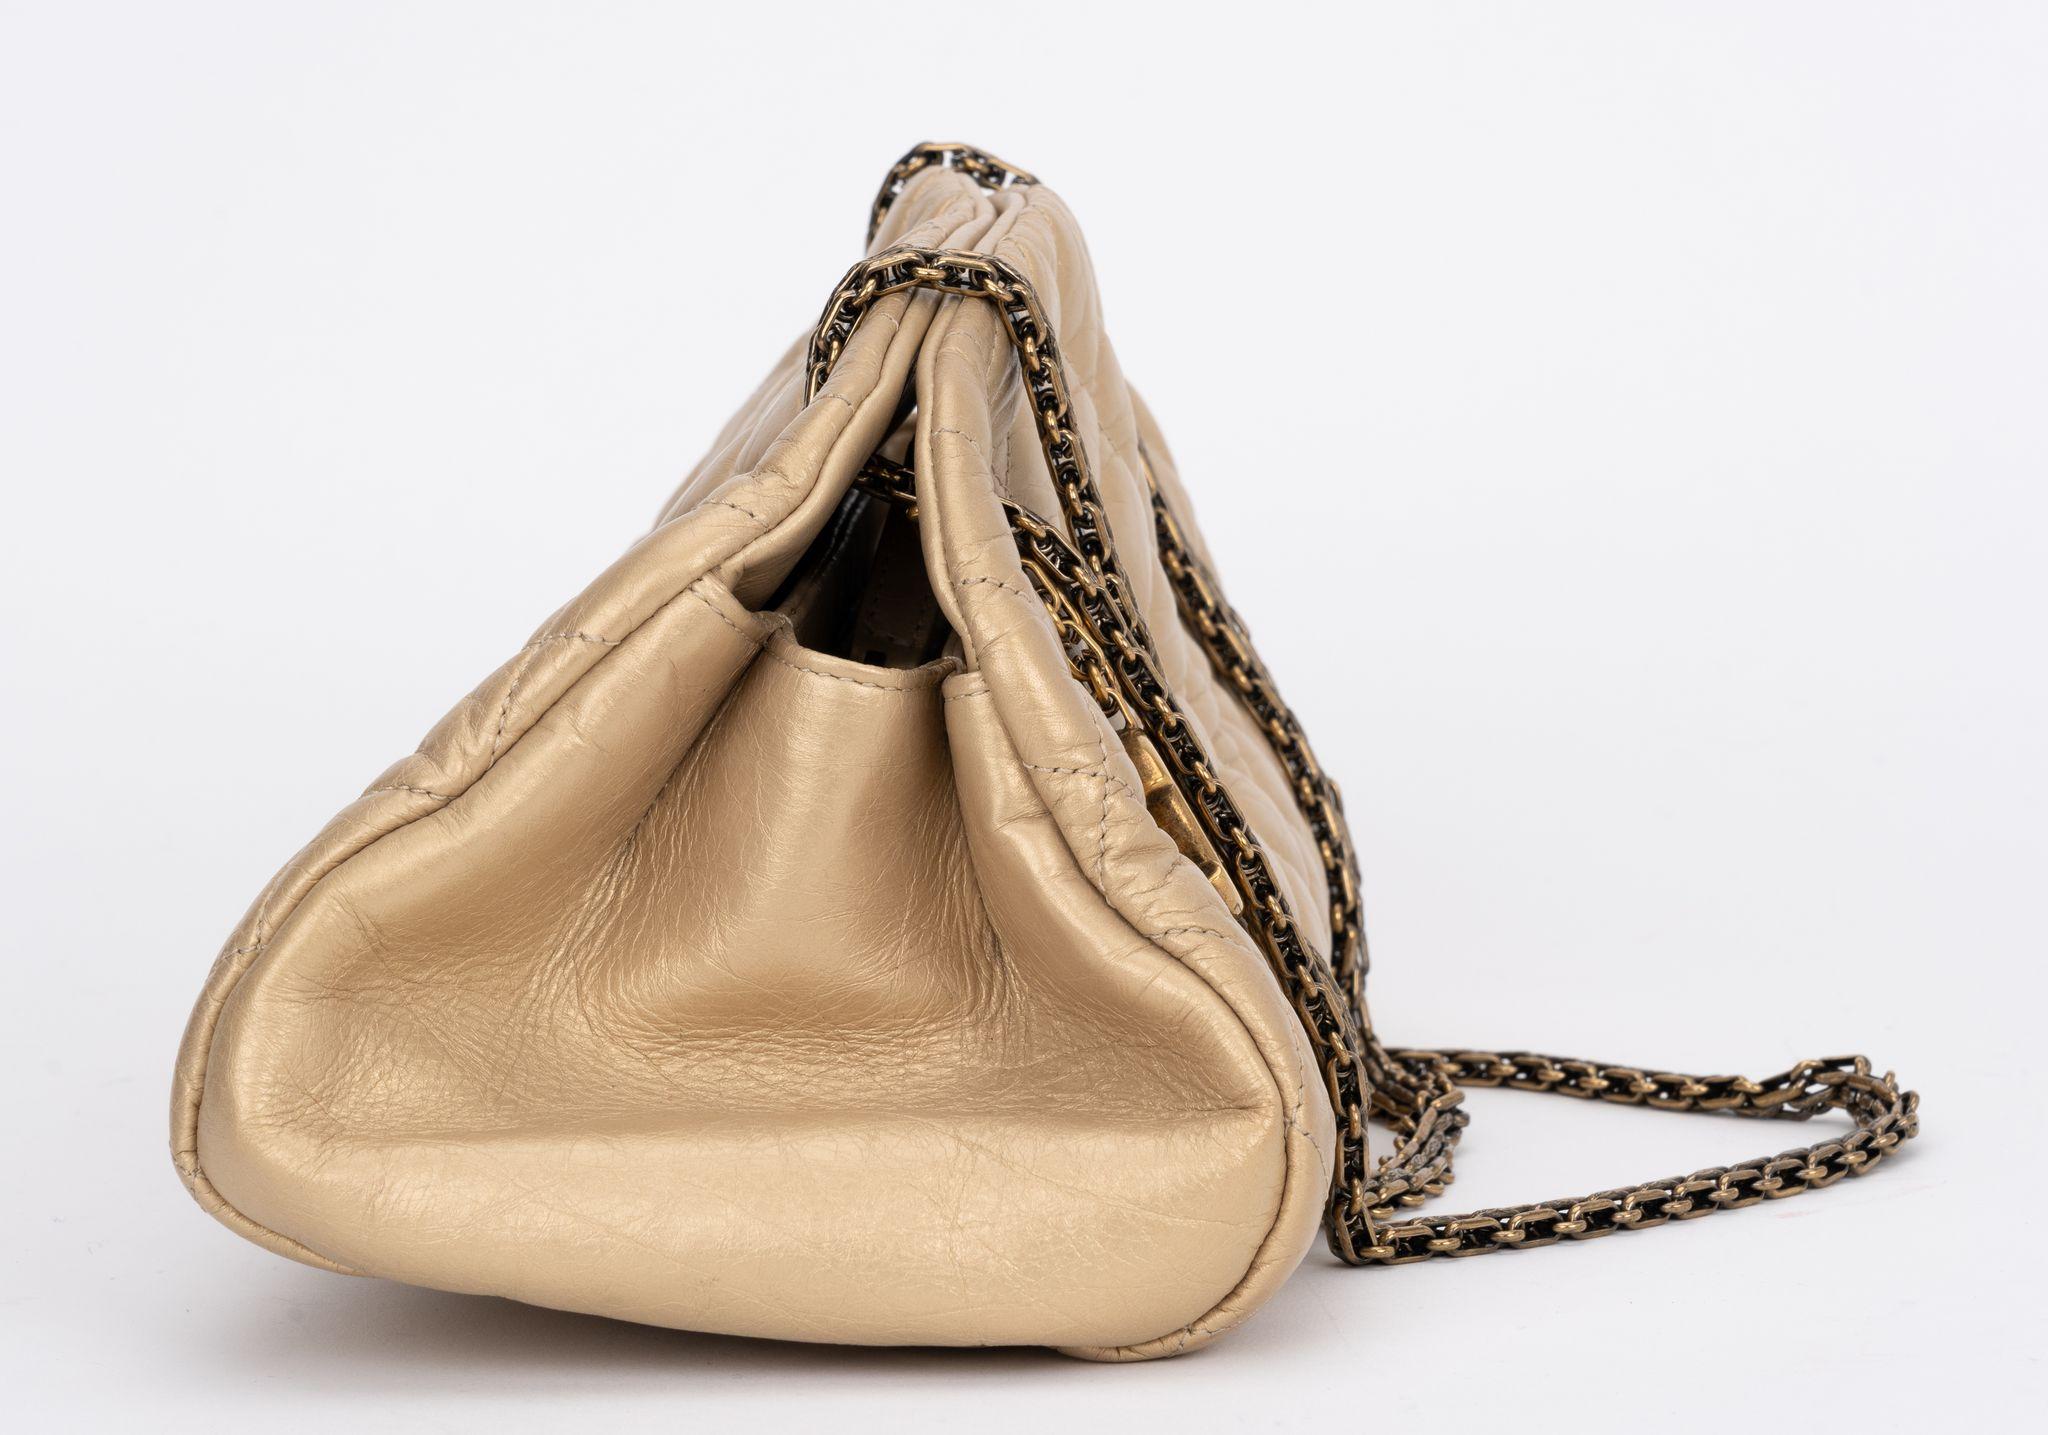 Chanel Gold Distressed Mademoiselle Bag In Excellent Condition For Sale In West Hollywood, CA